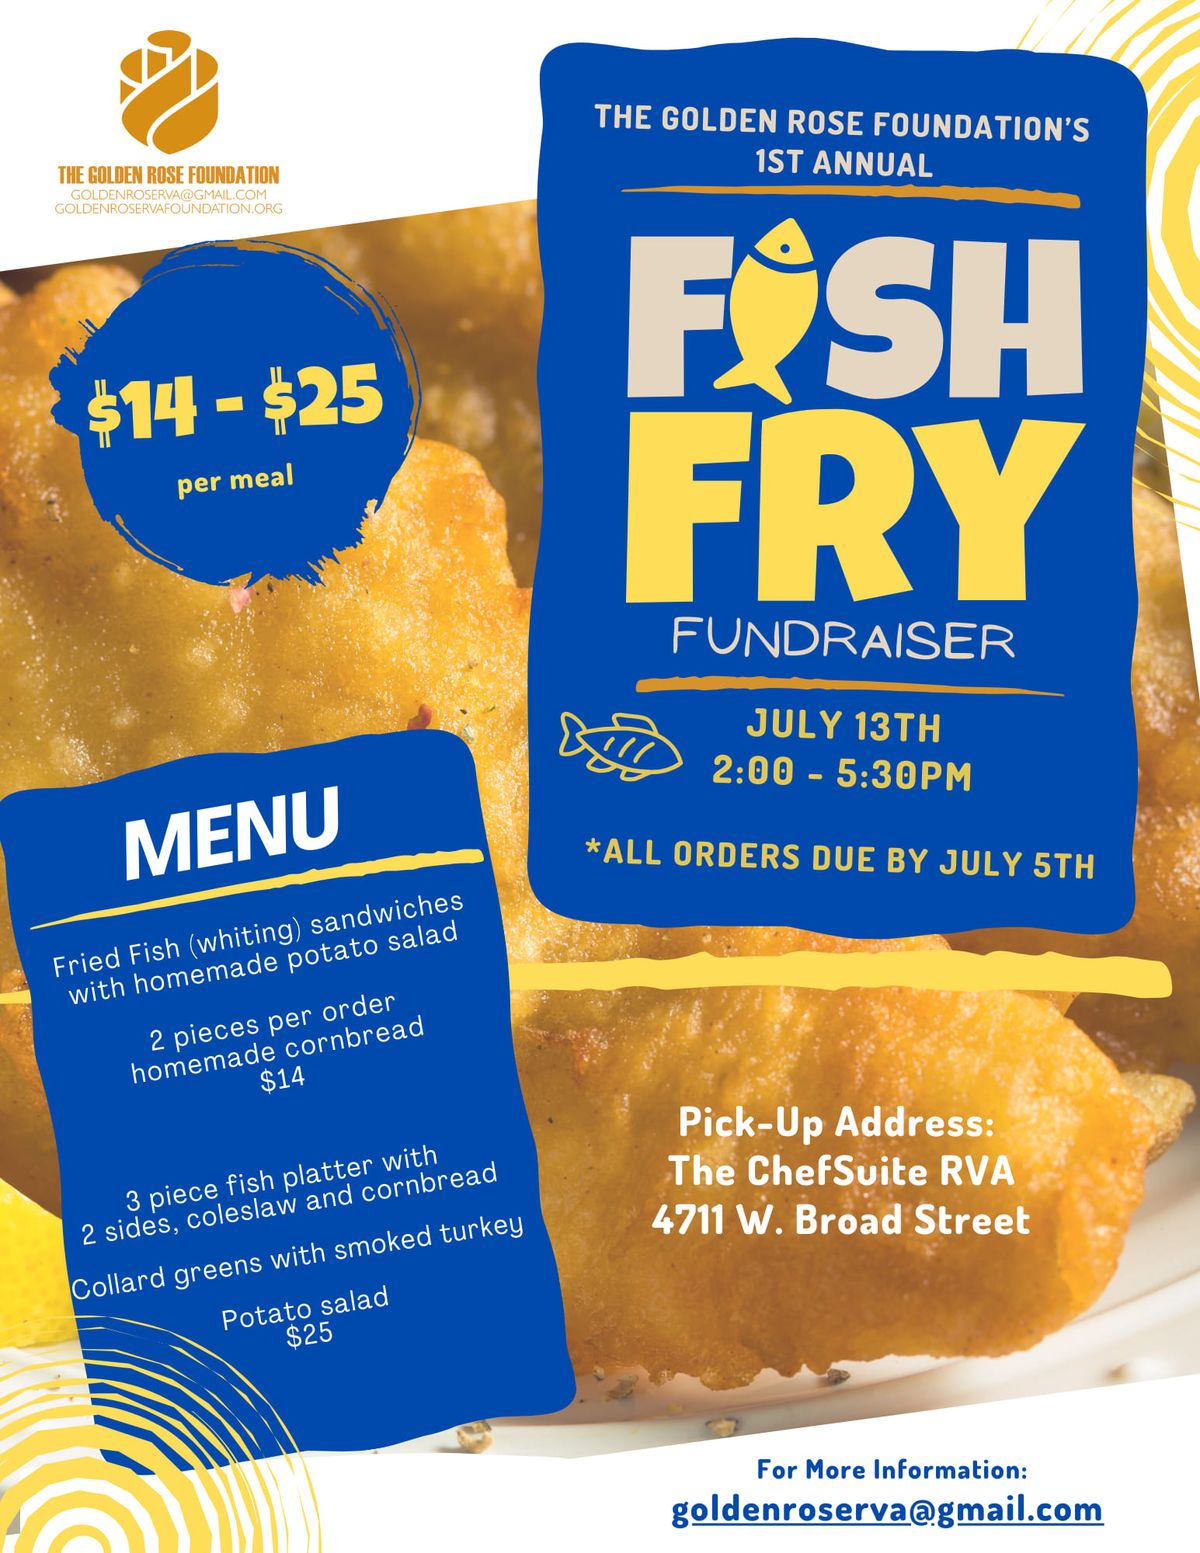 The Golden Rose Foundation's 1st Annual Fish Fry Fundraiser